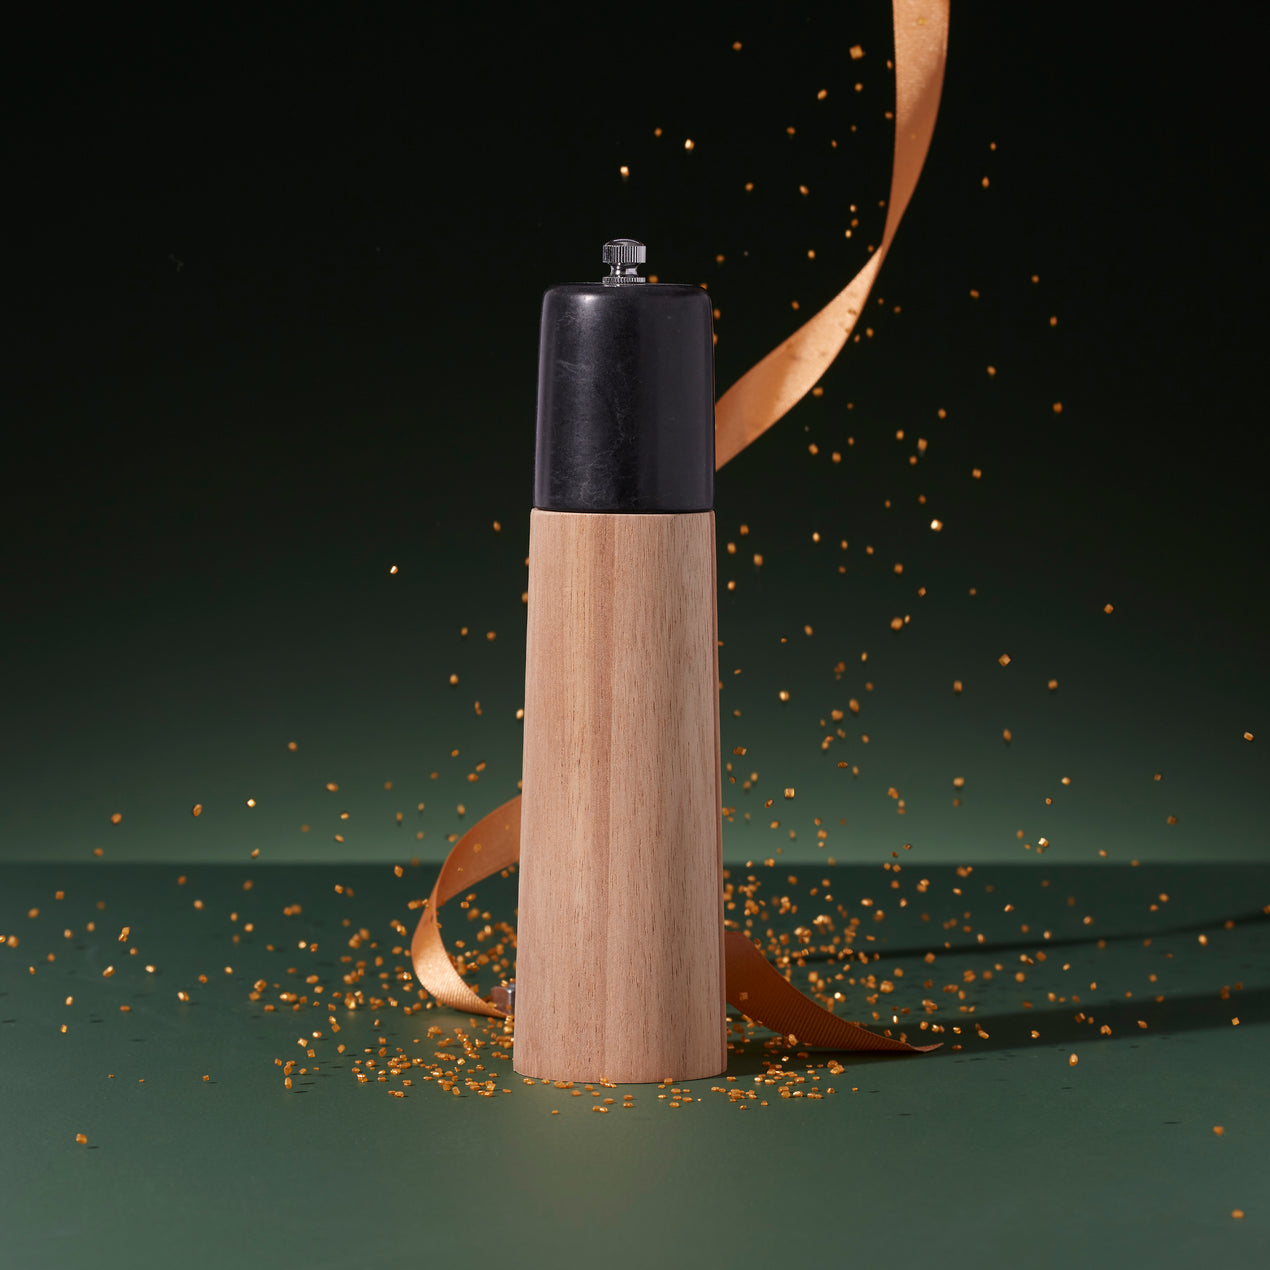 Lenox LX Collective Pepper Mill